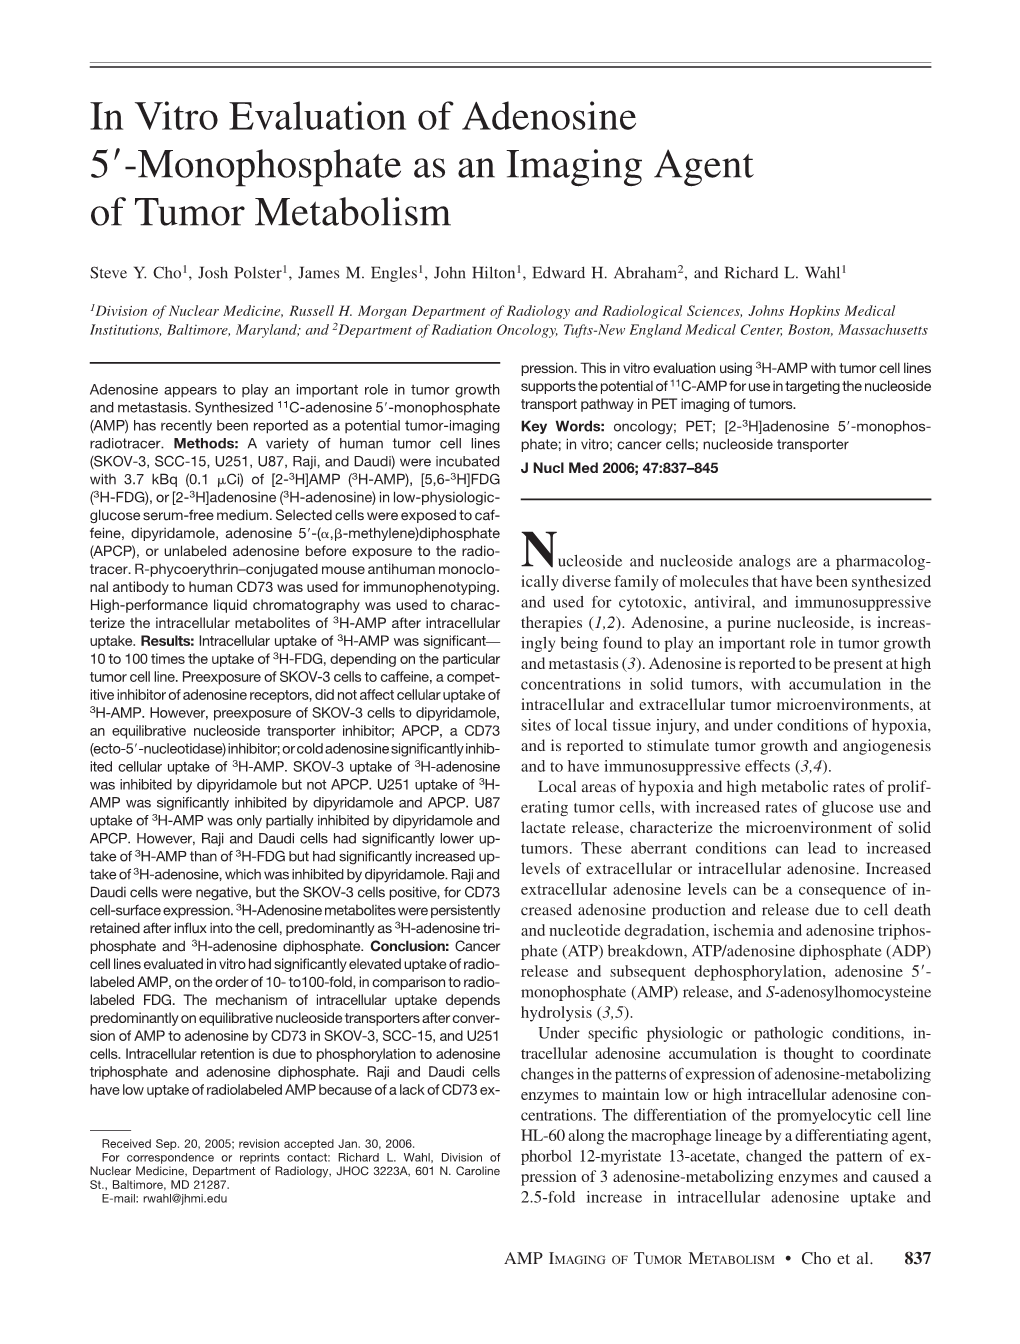 In Vitro Evaluation of Adenosine 59-Monophosphate As an Imaging Agent of Tumor Metabolism